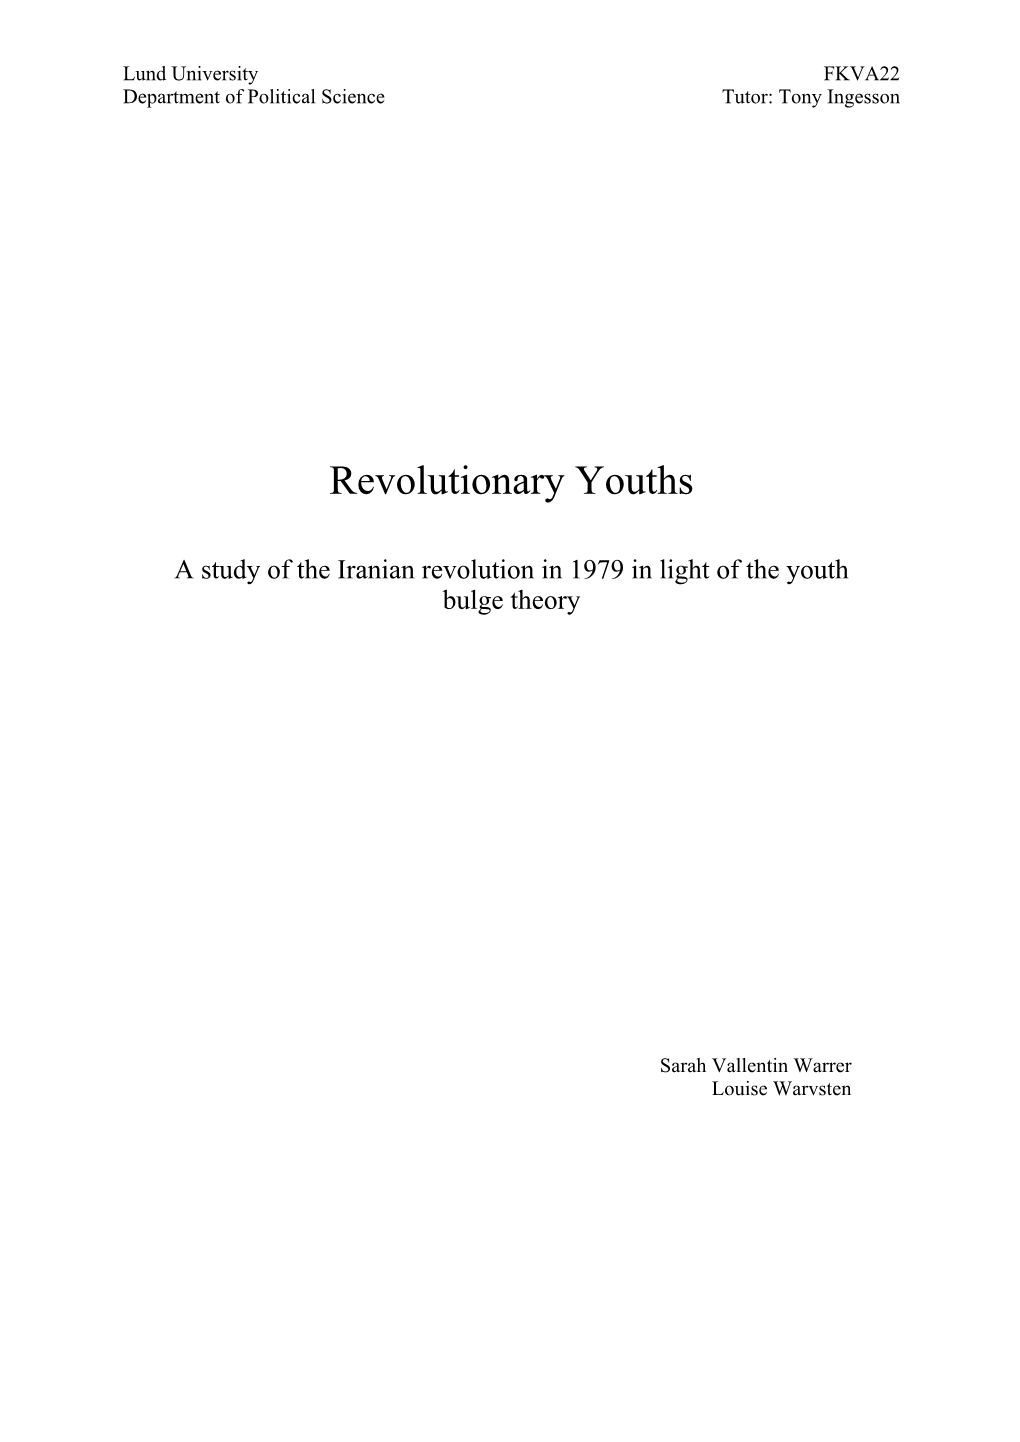 A Study of the Iranian Revolution in 1979 in Light of the Youth Bulge Theory